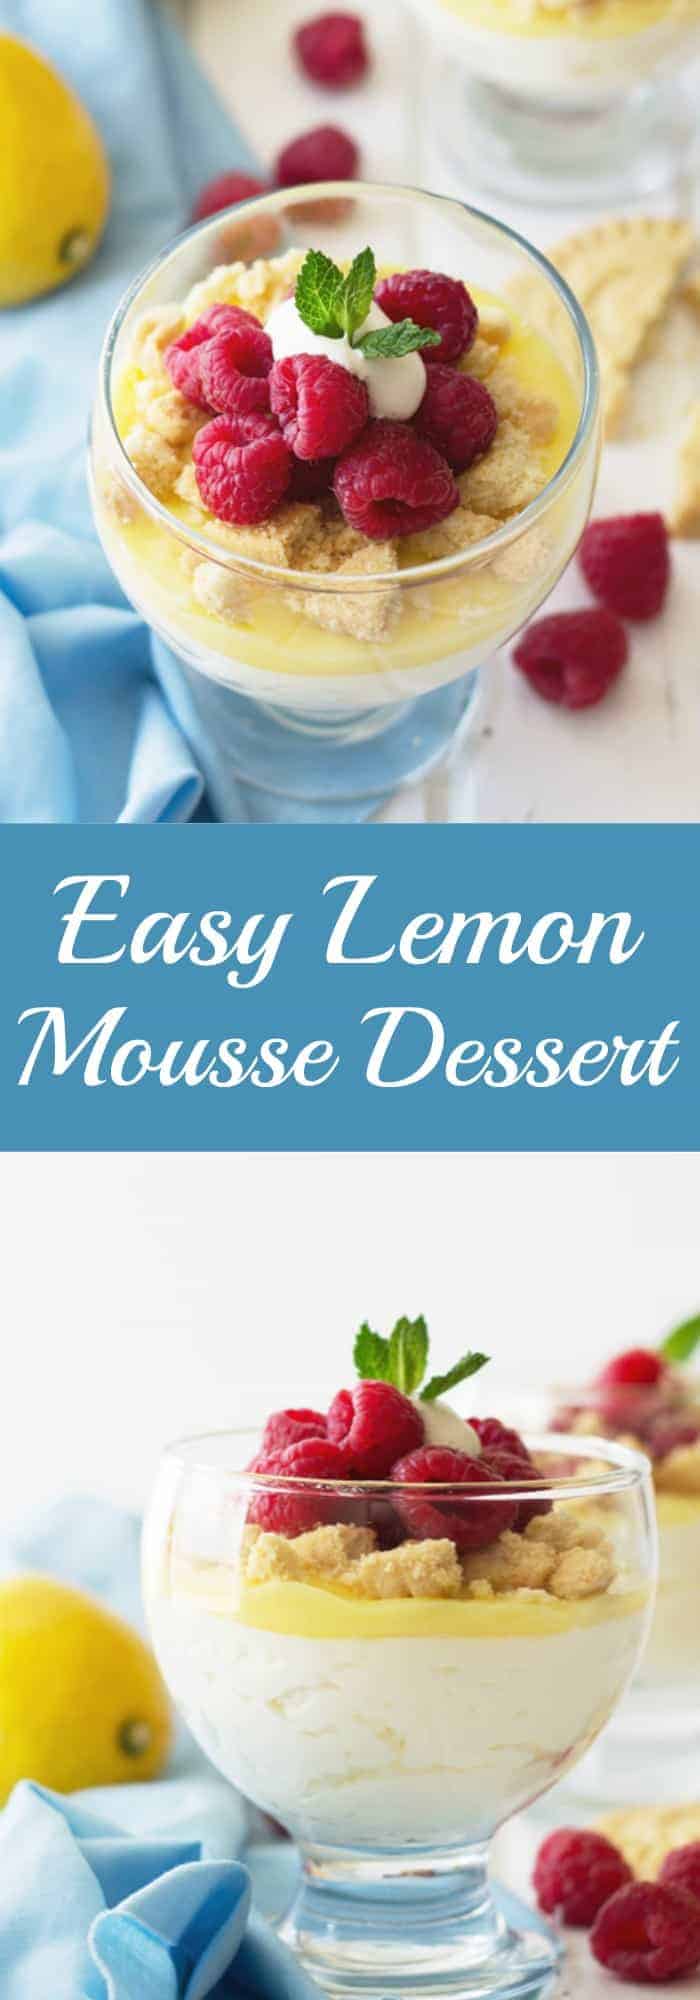 titled image (and shown): easy lemon mousse dessert cups